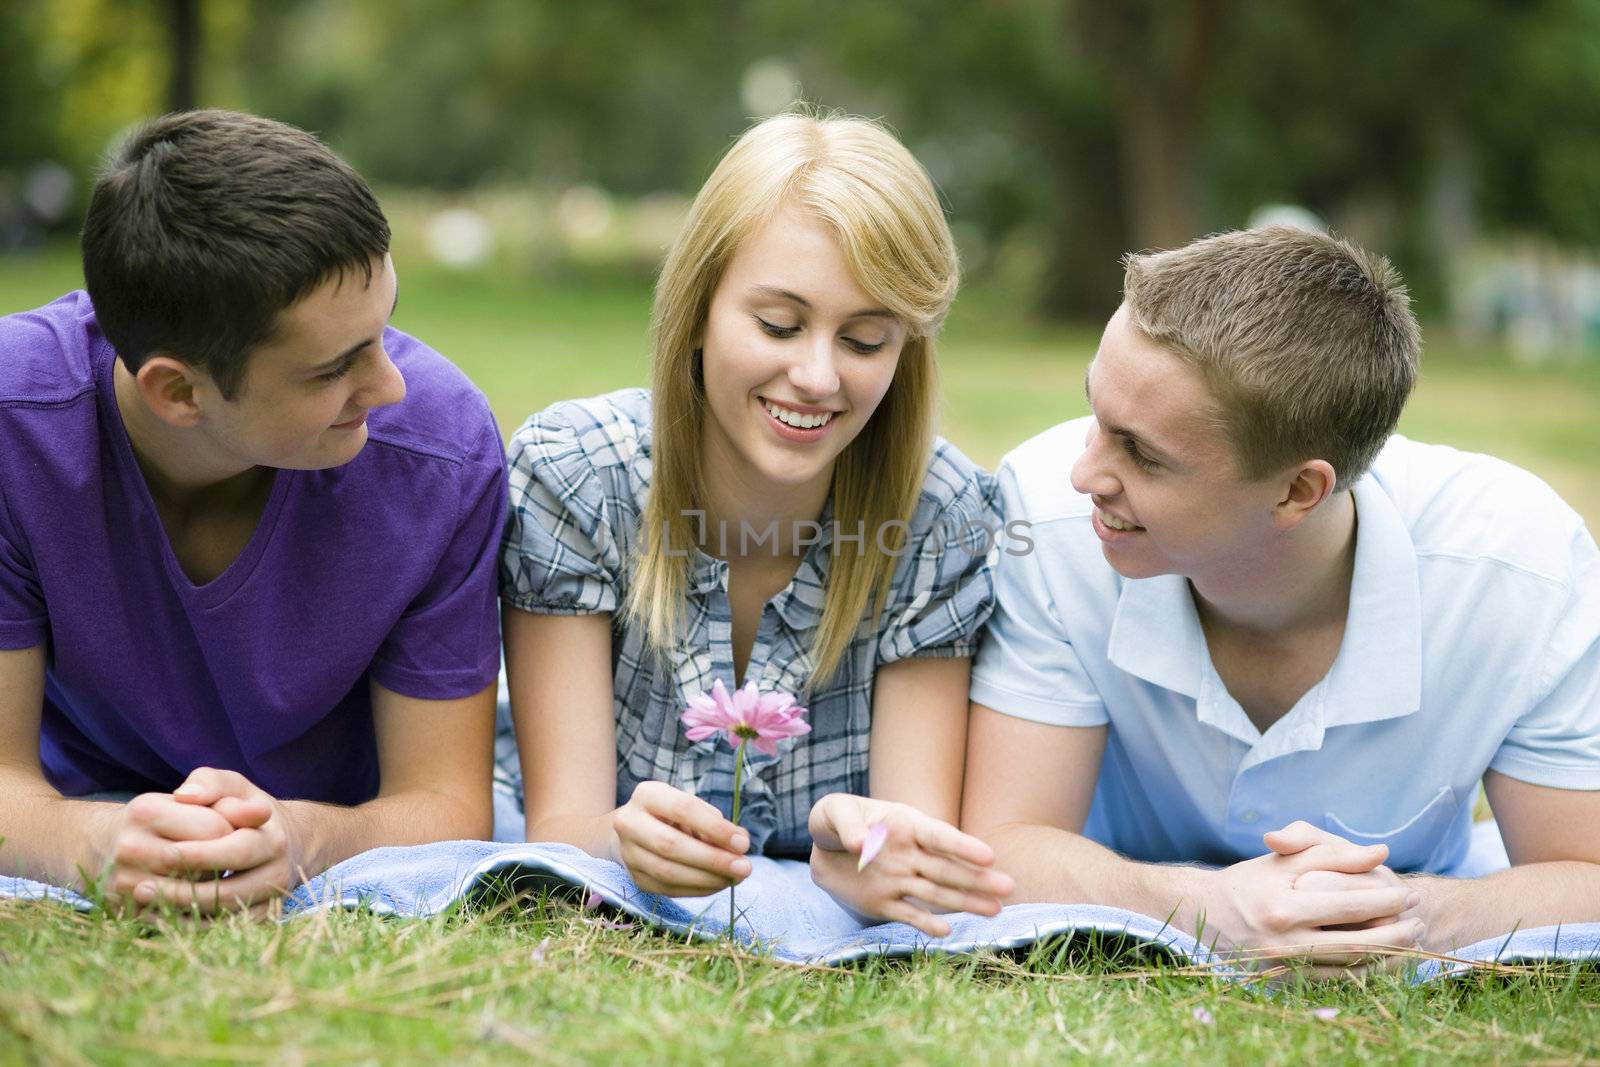 Group of Three Teens Lying on Blanket in a Park